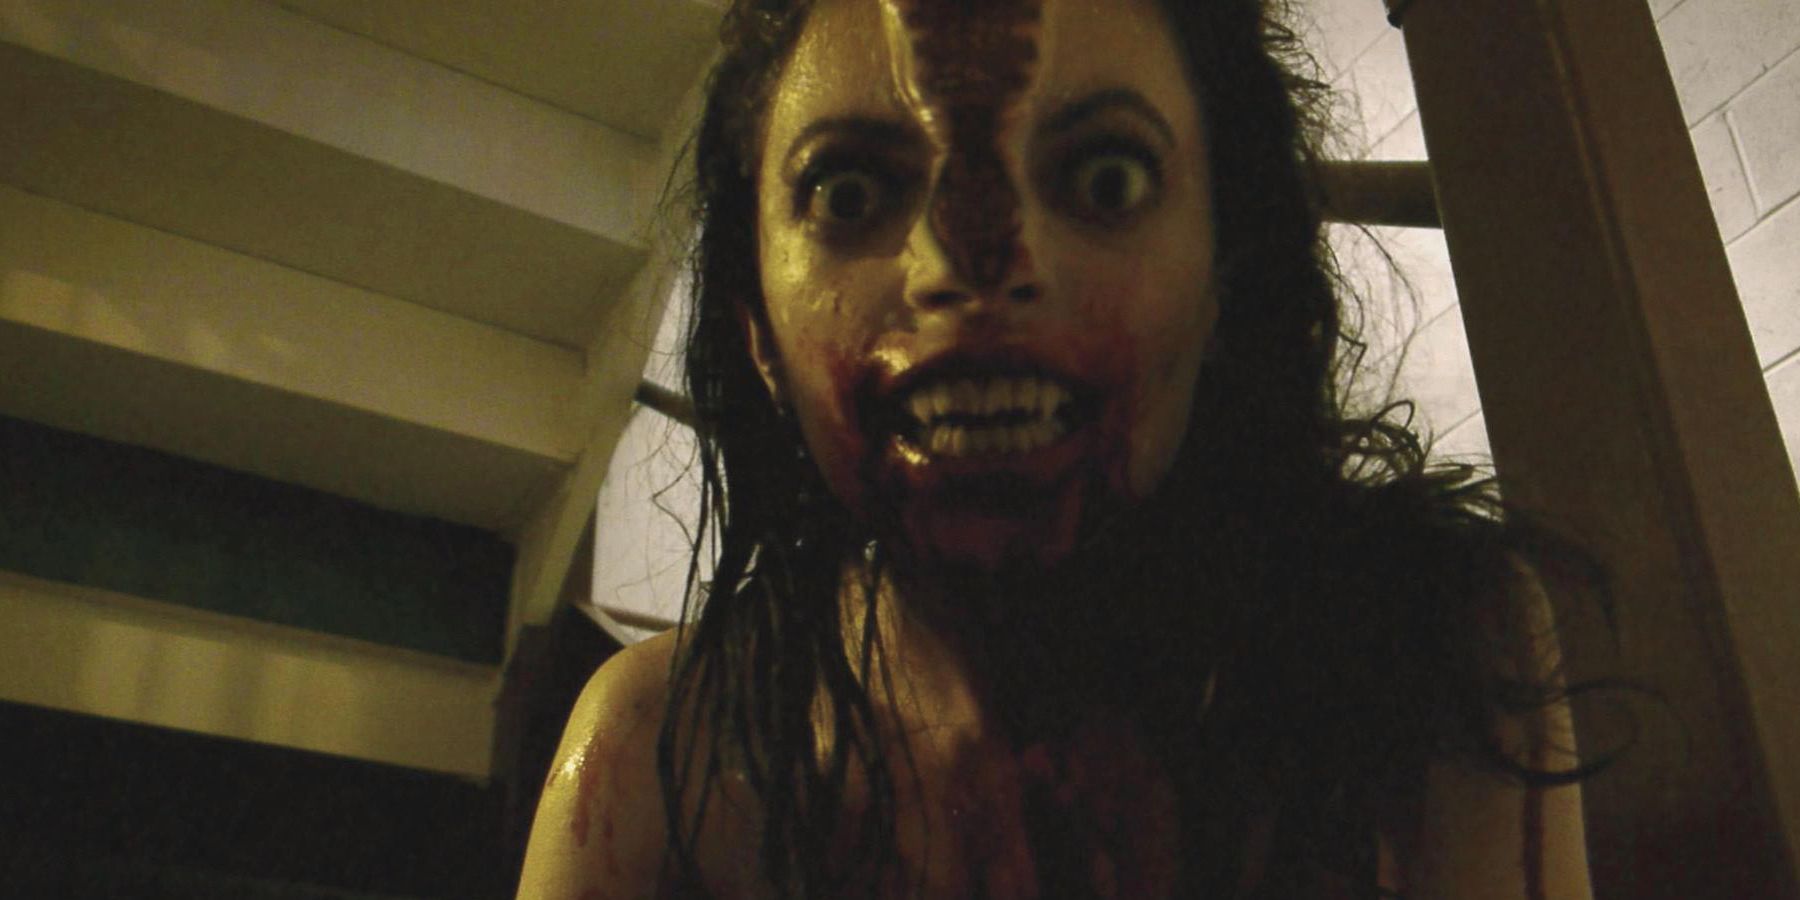 A woman sheds her skin to reveal a demonic monster in V/H/S